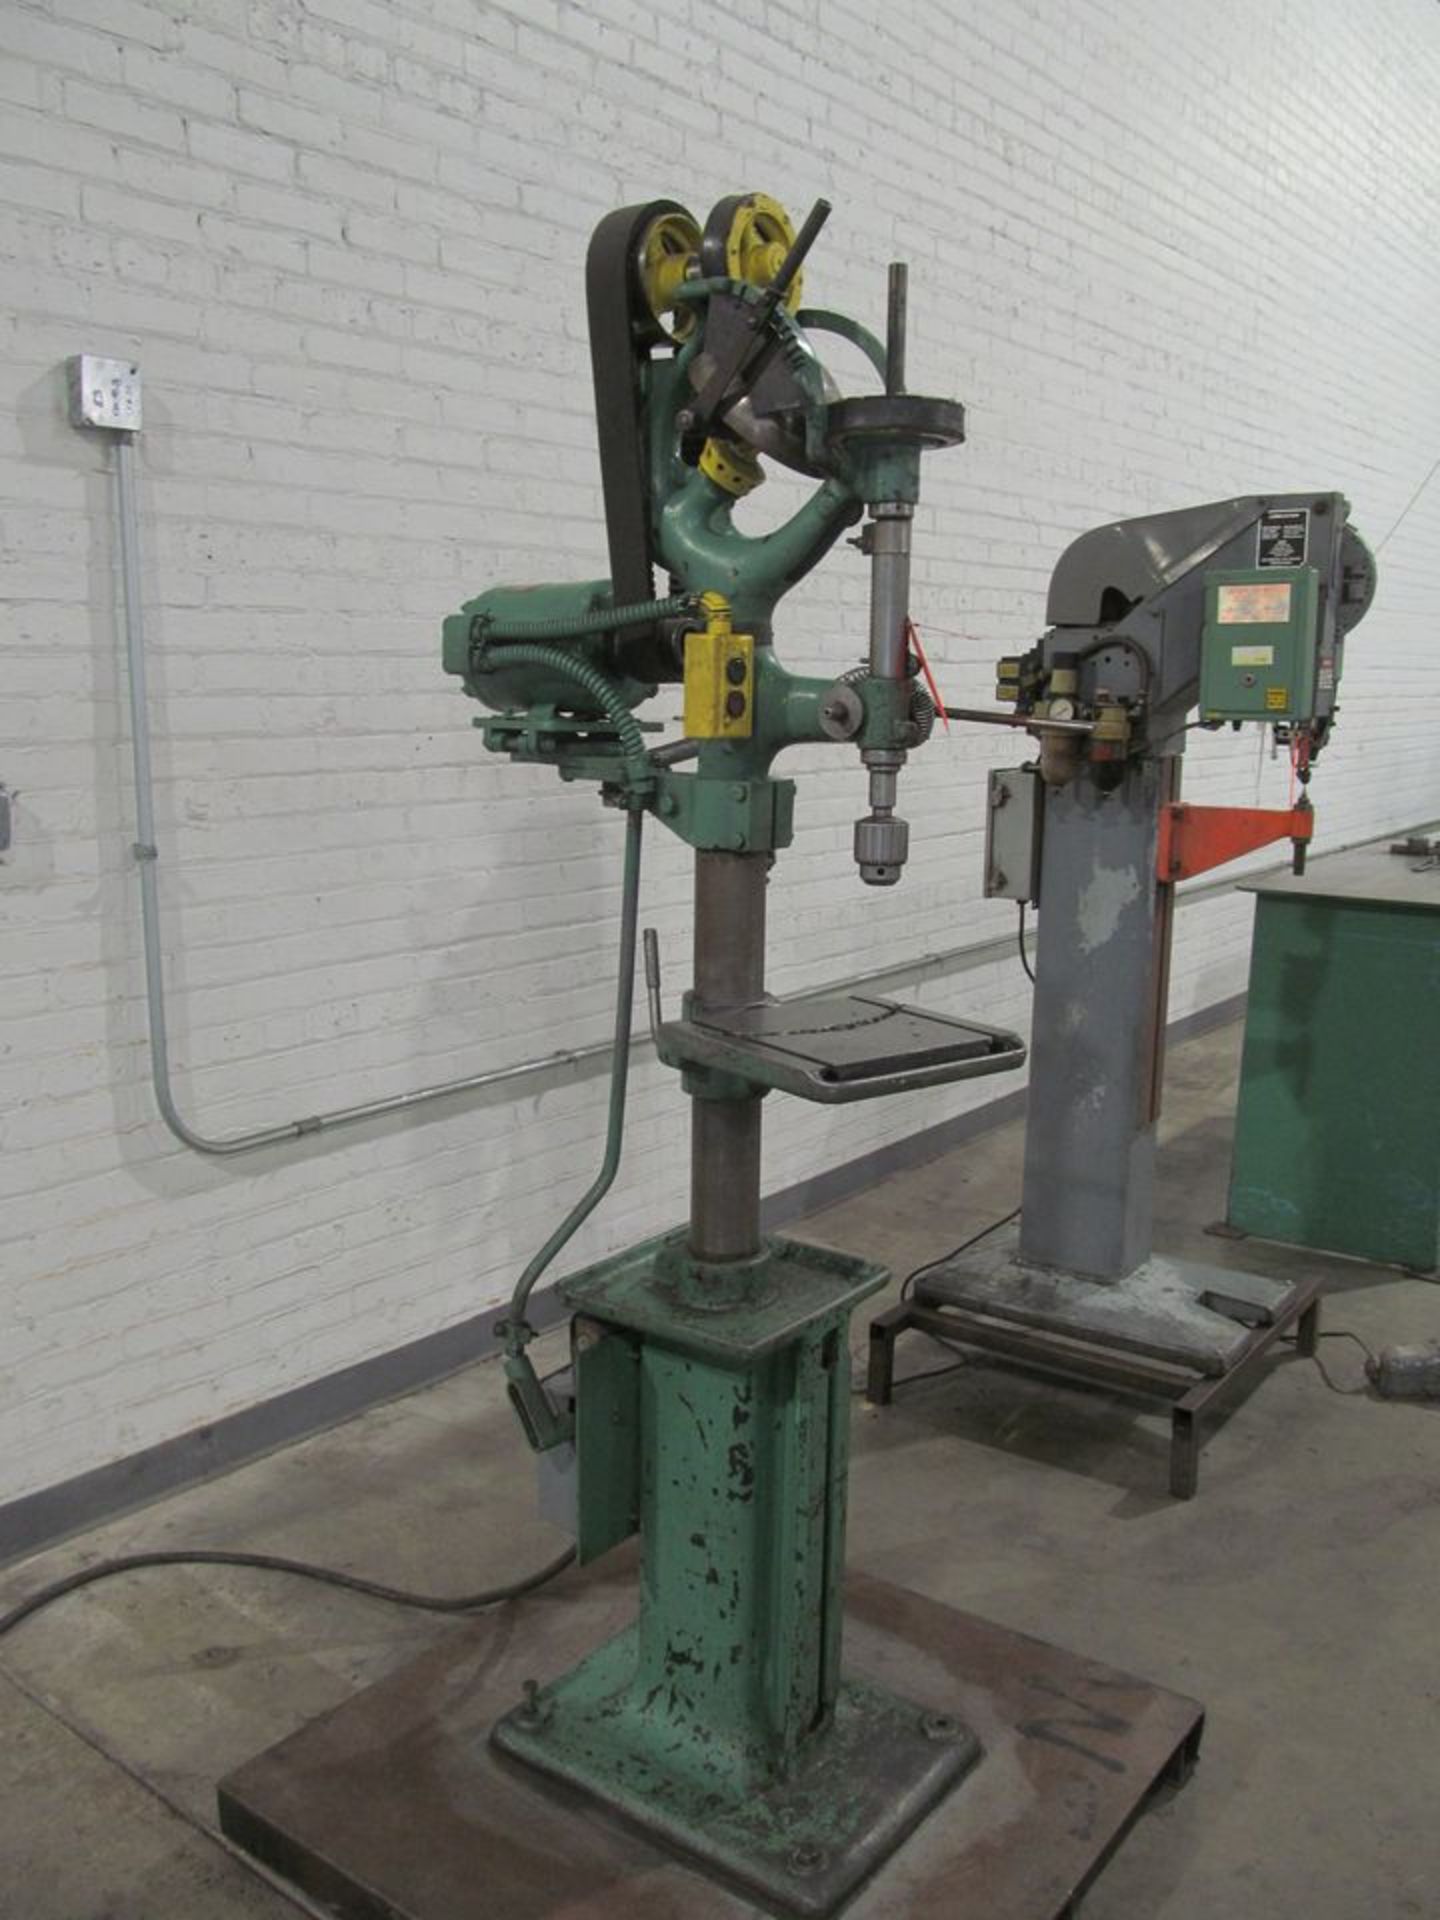 12 in. Single Spindle Vertical Boring Machine; Belt-Driven, 1/2-HP, 9-1/2 in. x 11-1/2 in. Table ( - Image 3 of 3